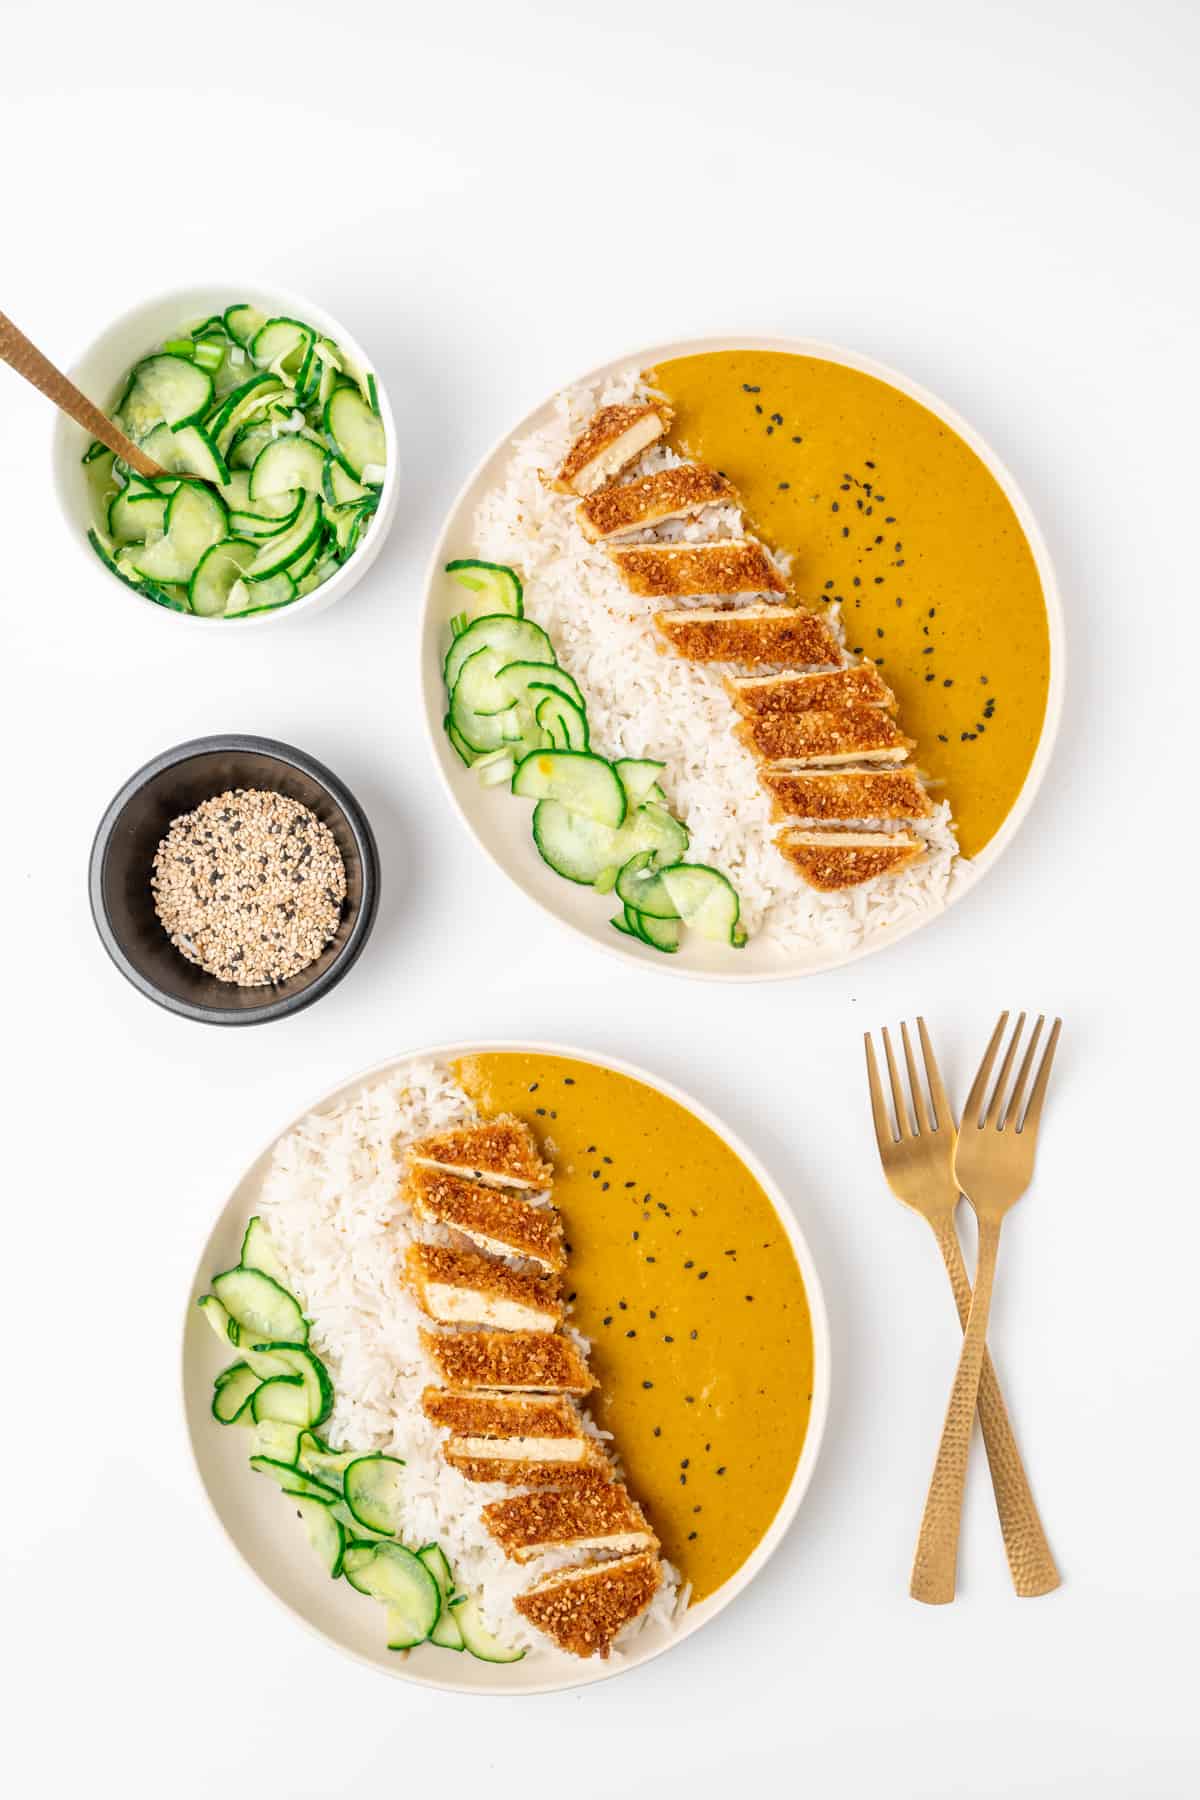 Two plates of vegan katsu curry, with cucumber pickles and sesame seeds on the side.